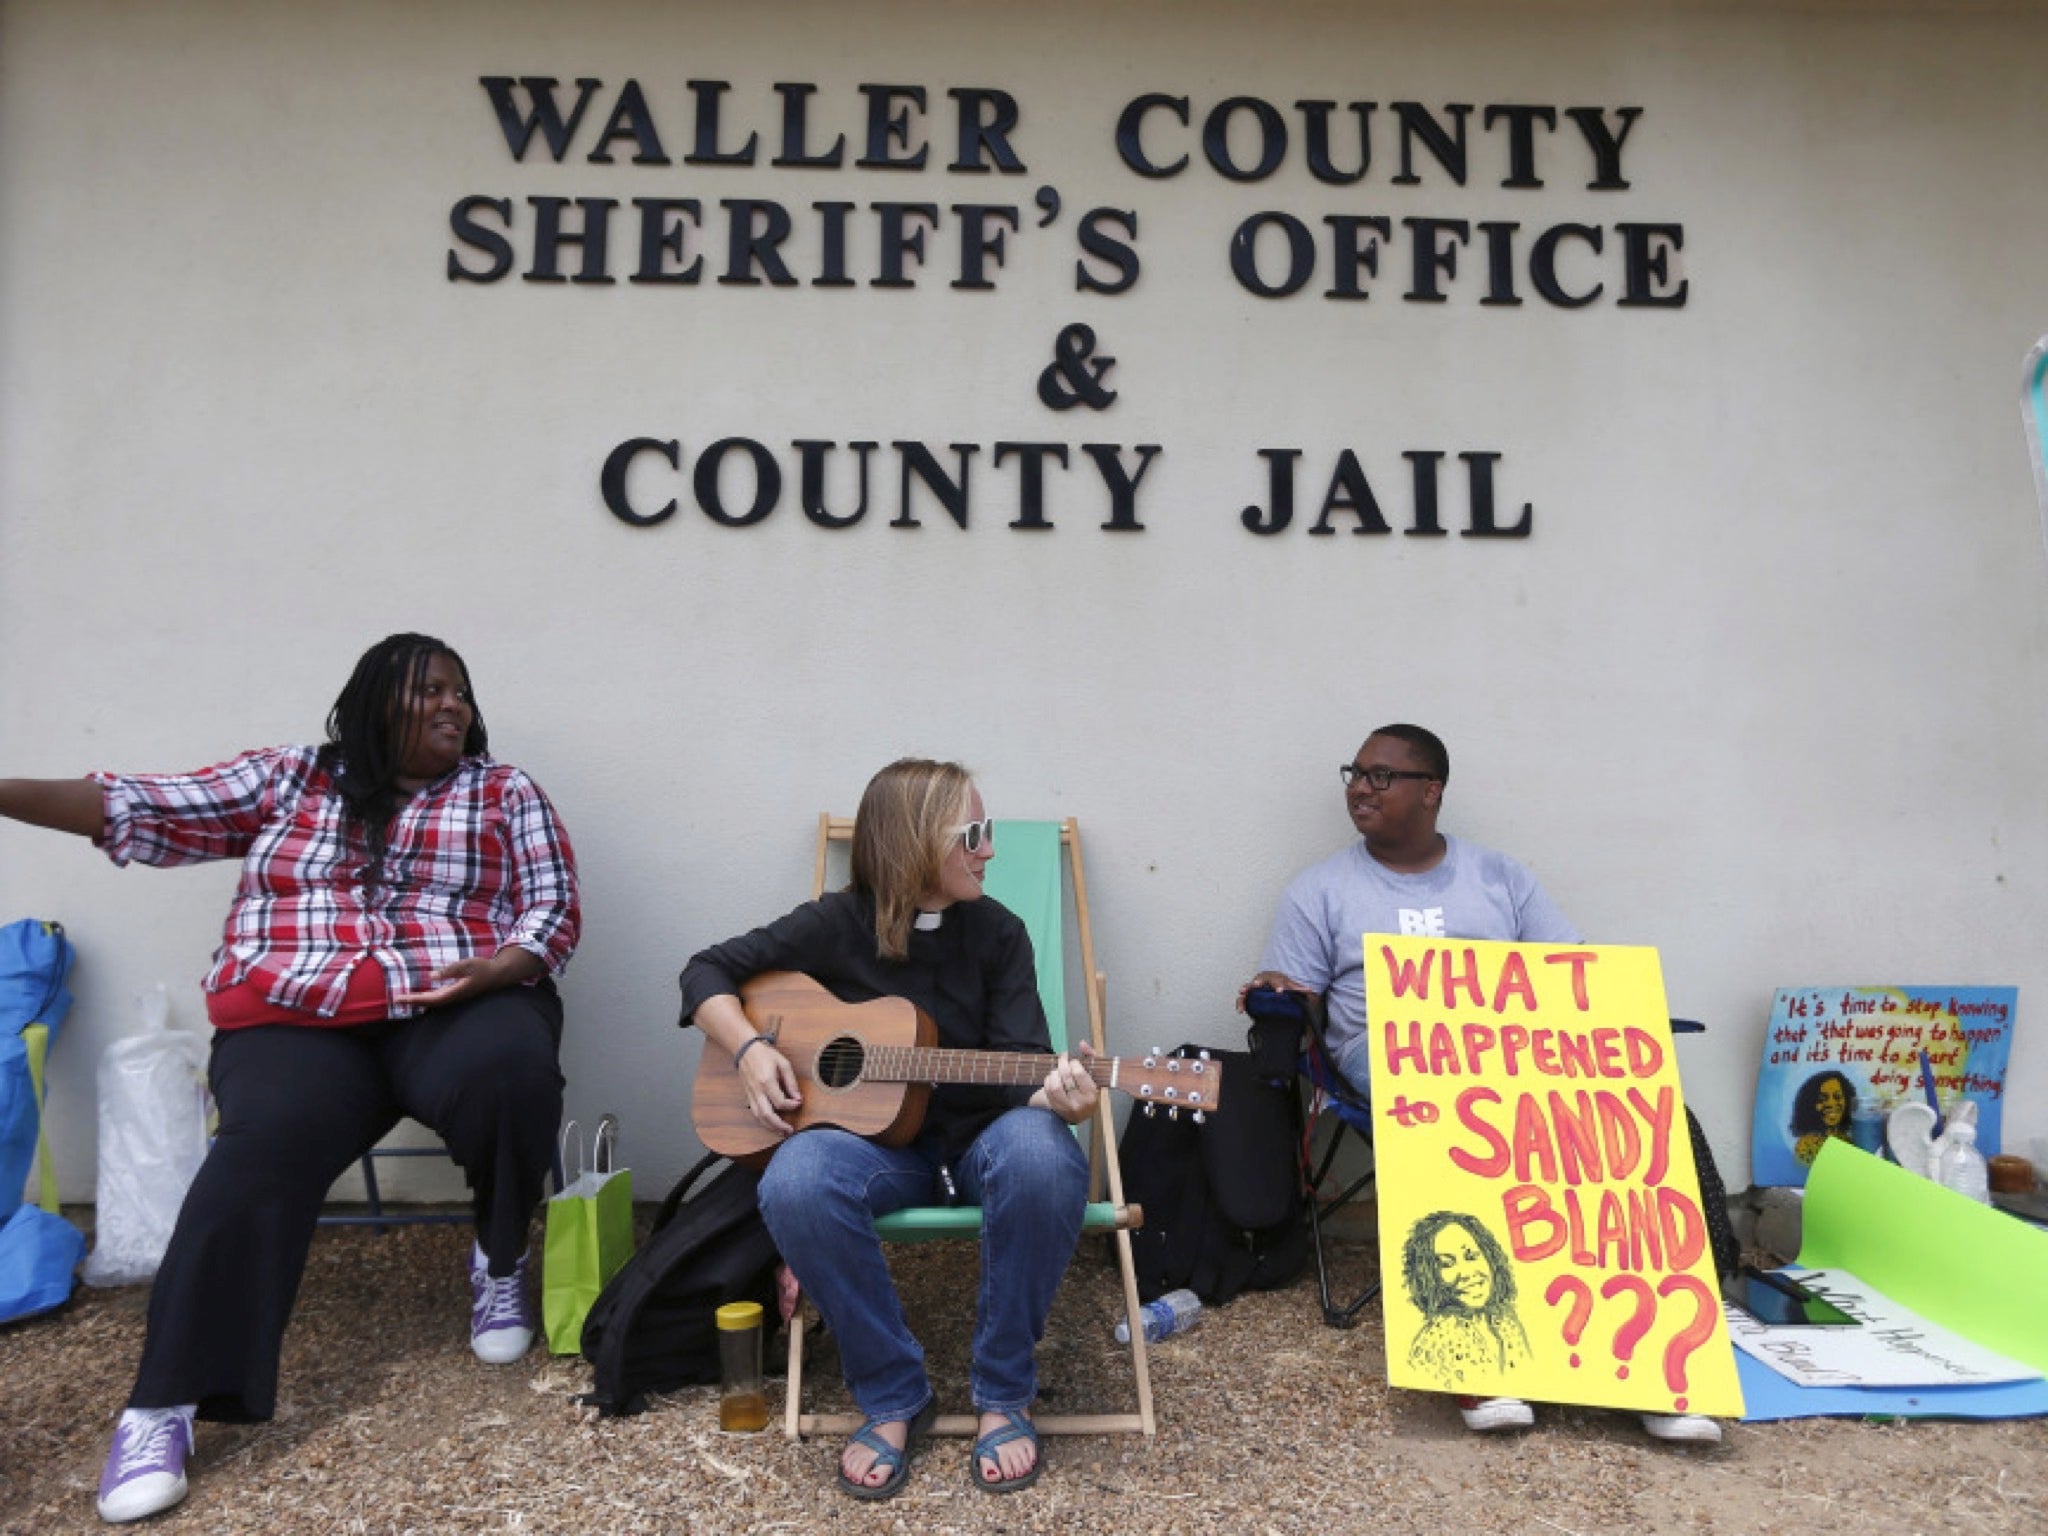 Hannah Bonner at the Waller County Sheriff's Office